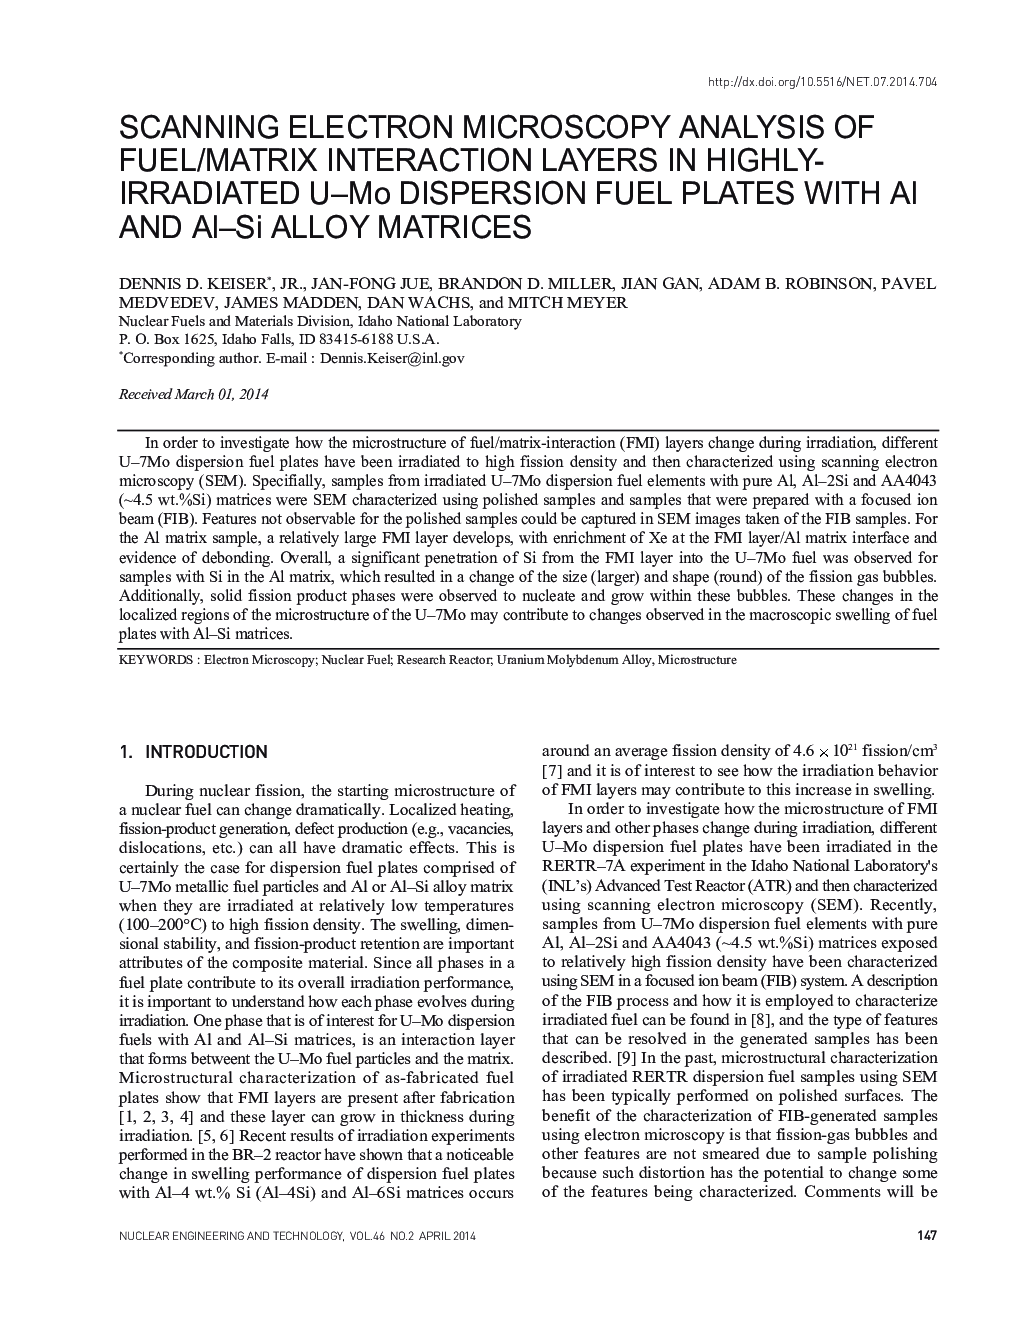 SCANNING ELECTRON MICROSCOPY ANALYSIS OF FUEL/MATRIX INTERACTION LAYERS IN HIGHLY-IRRADIATED U-Mo DISPERSION FUEL PLATES WITH Al AND Al–Si ALLOY MATRICES